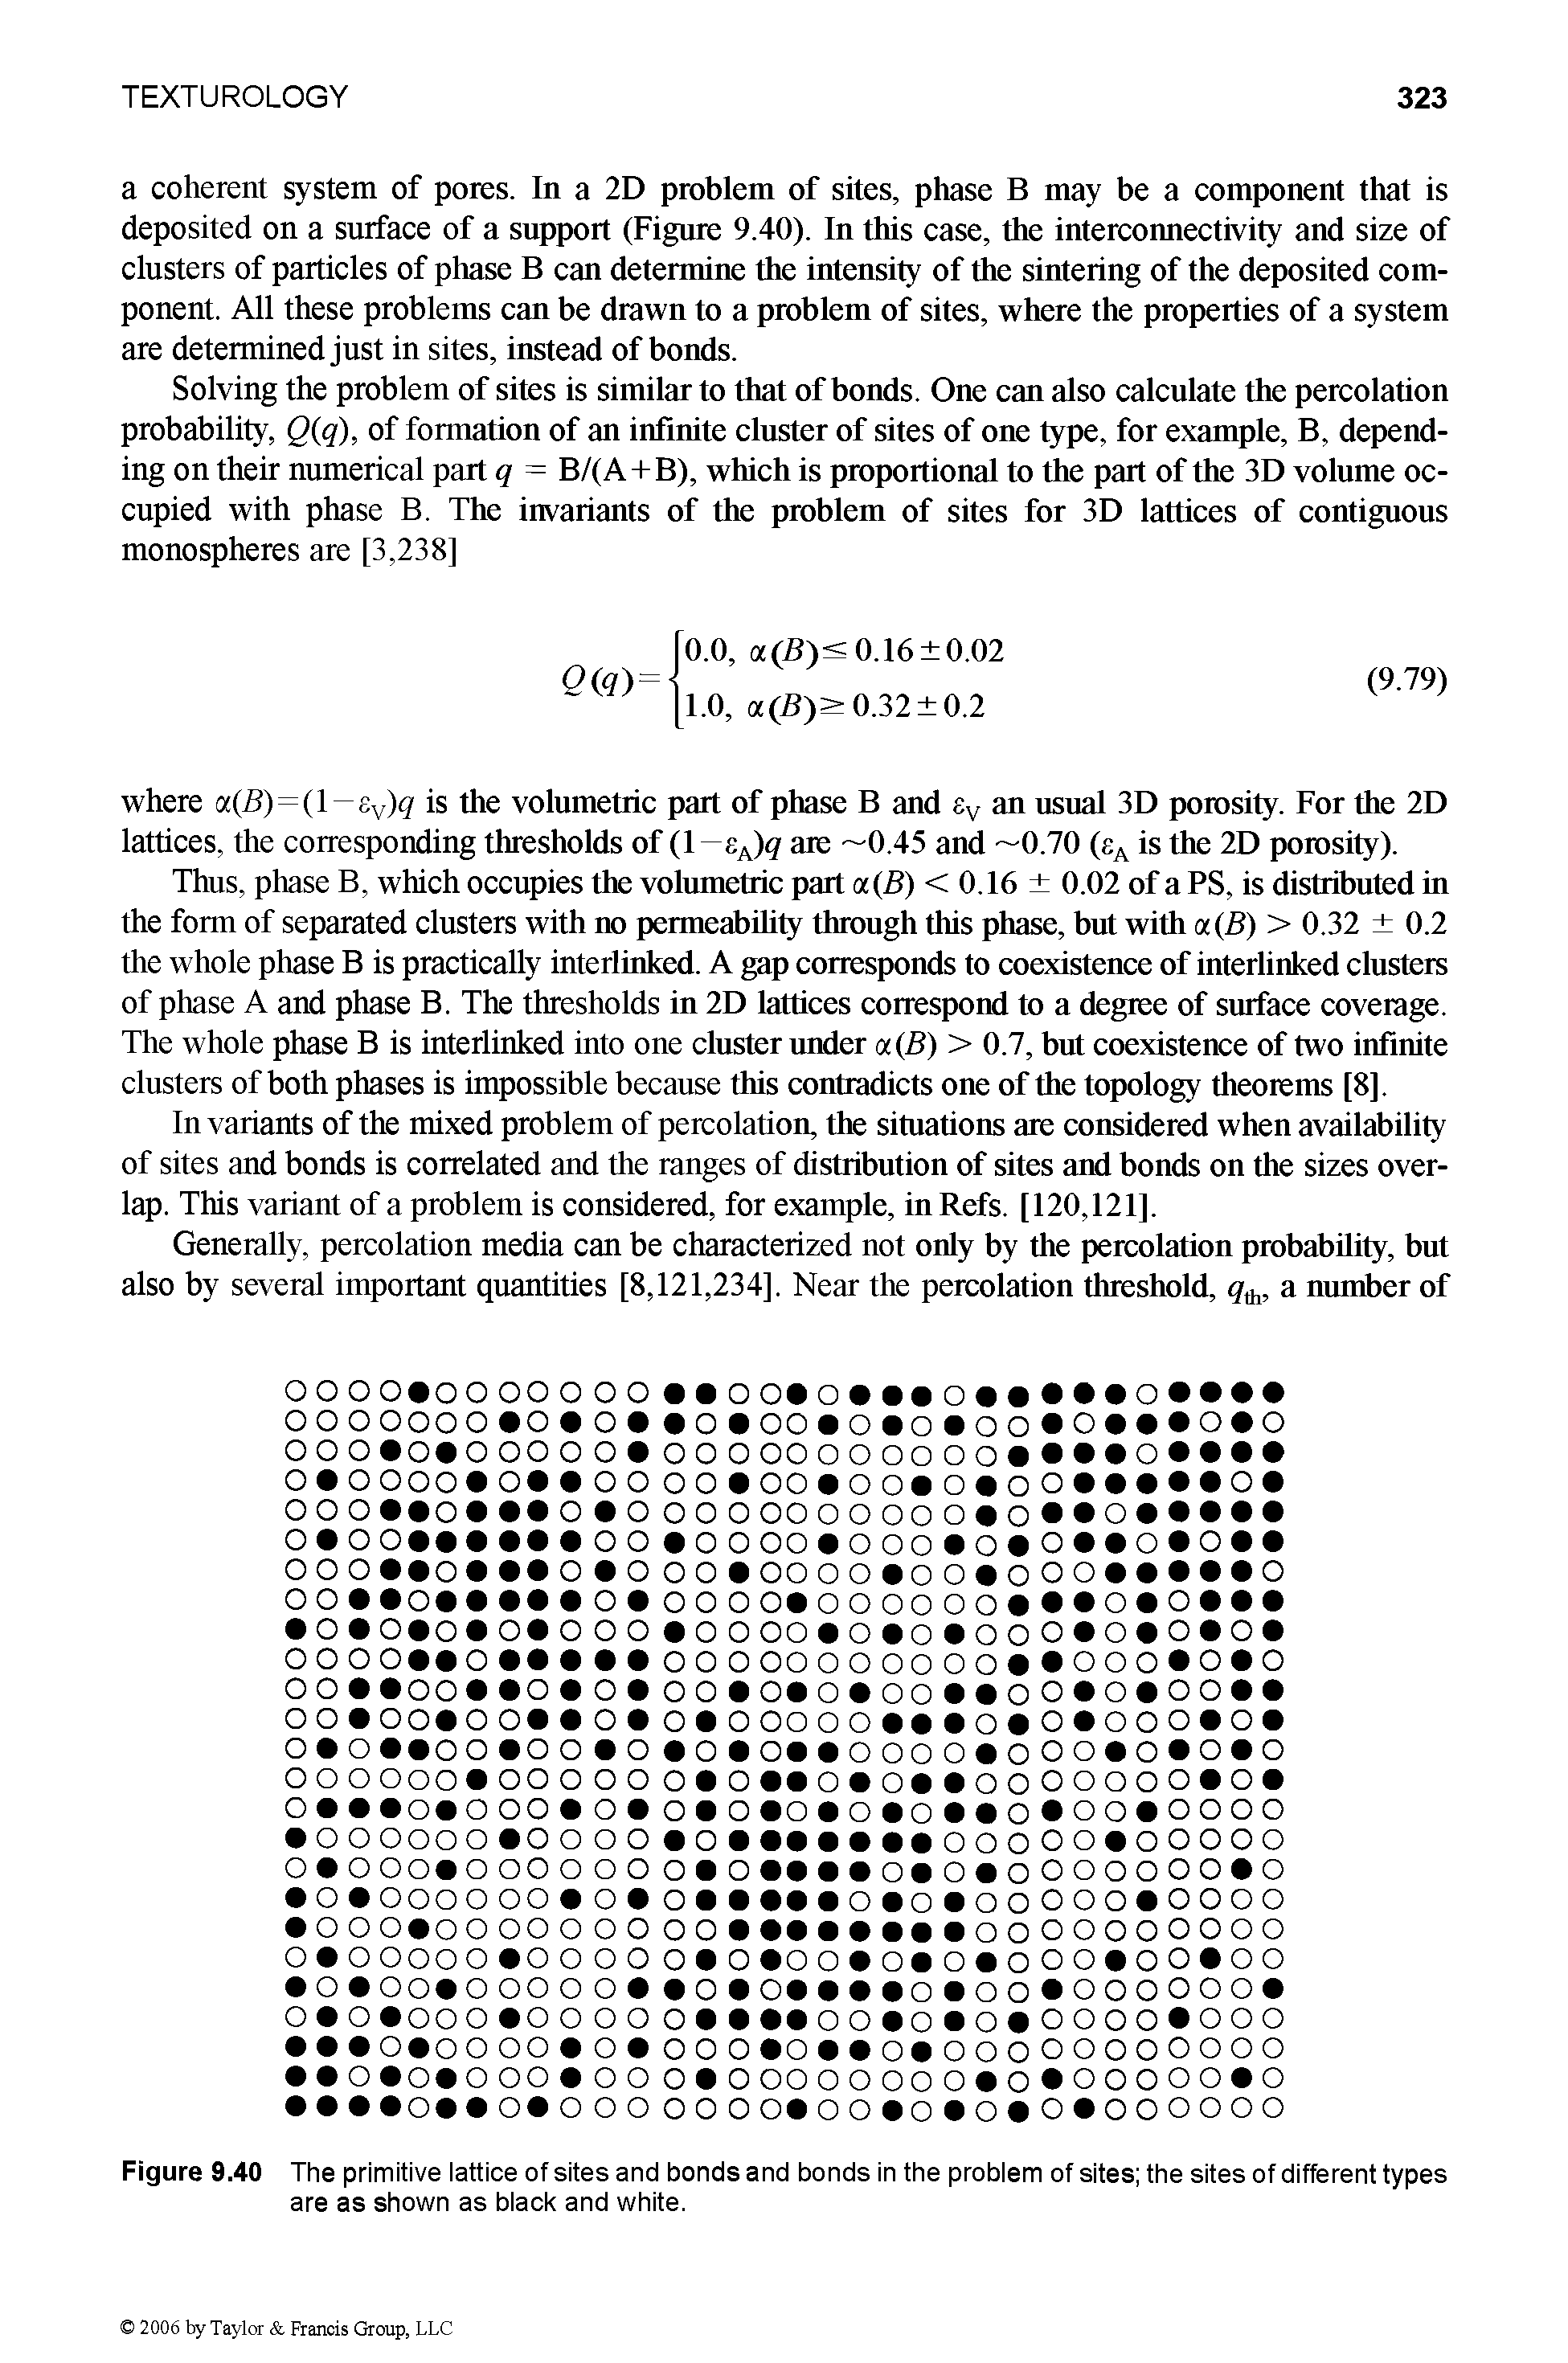 Figure 9.40 The primitive lattice of sites and bonds and bonds in the problem of sites the sites of different types are as shown as black and white.